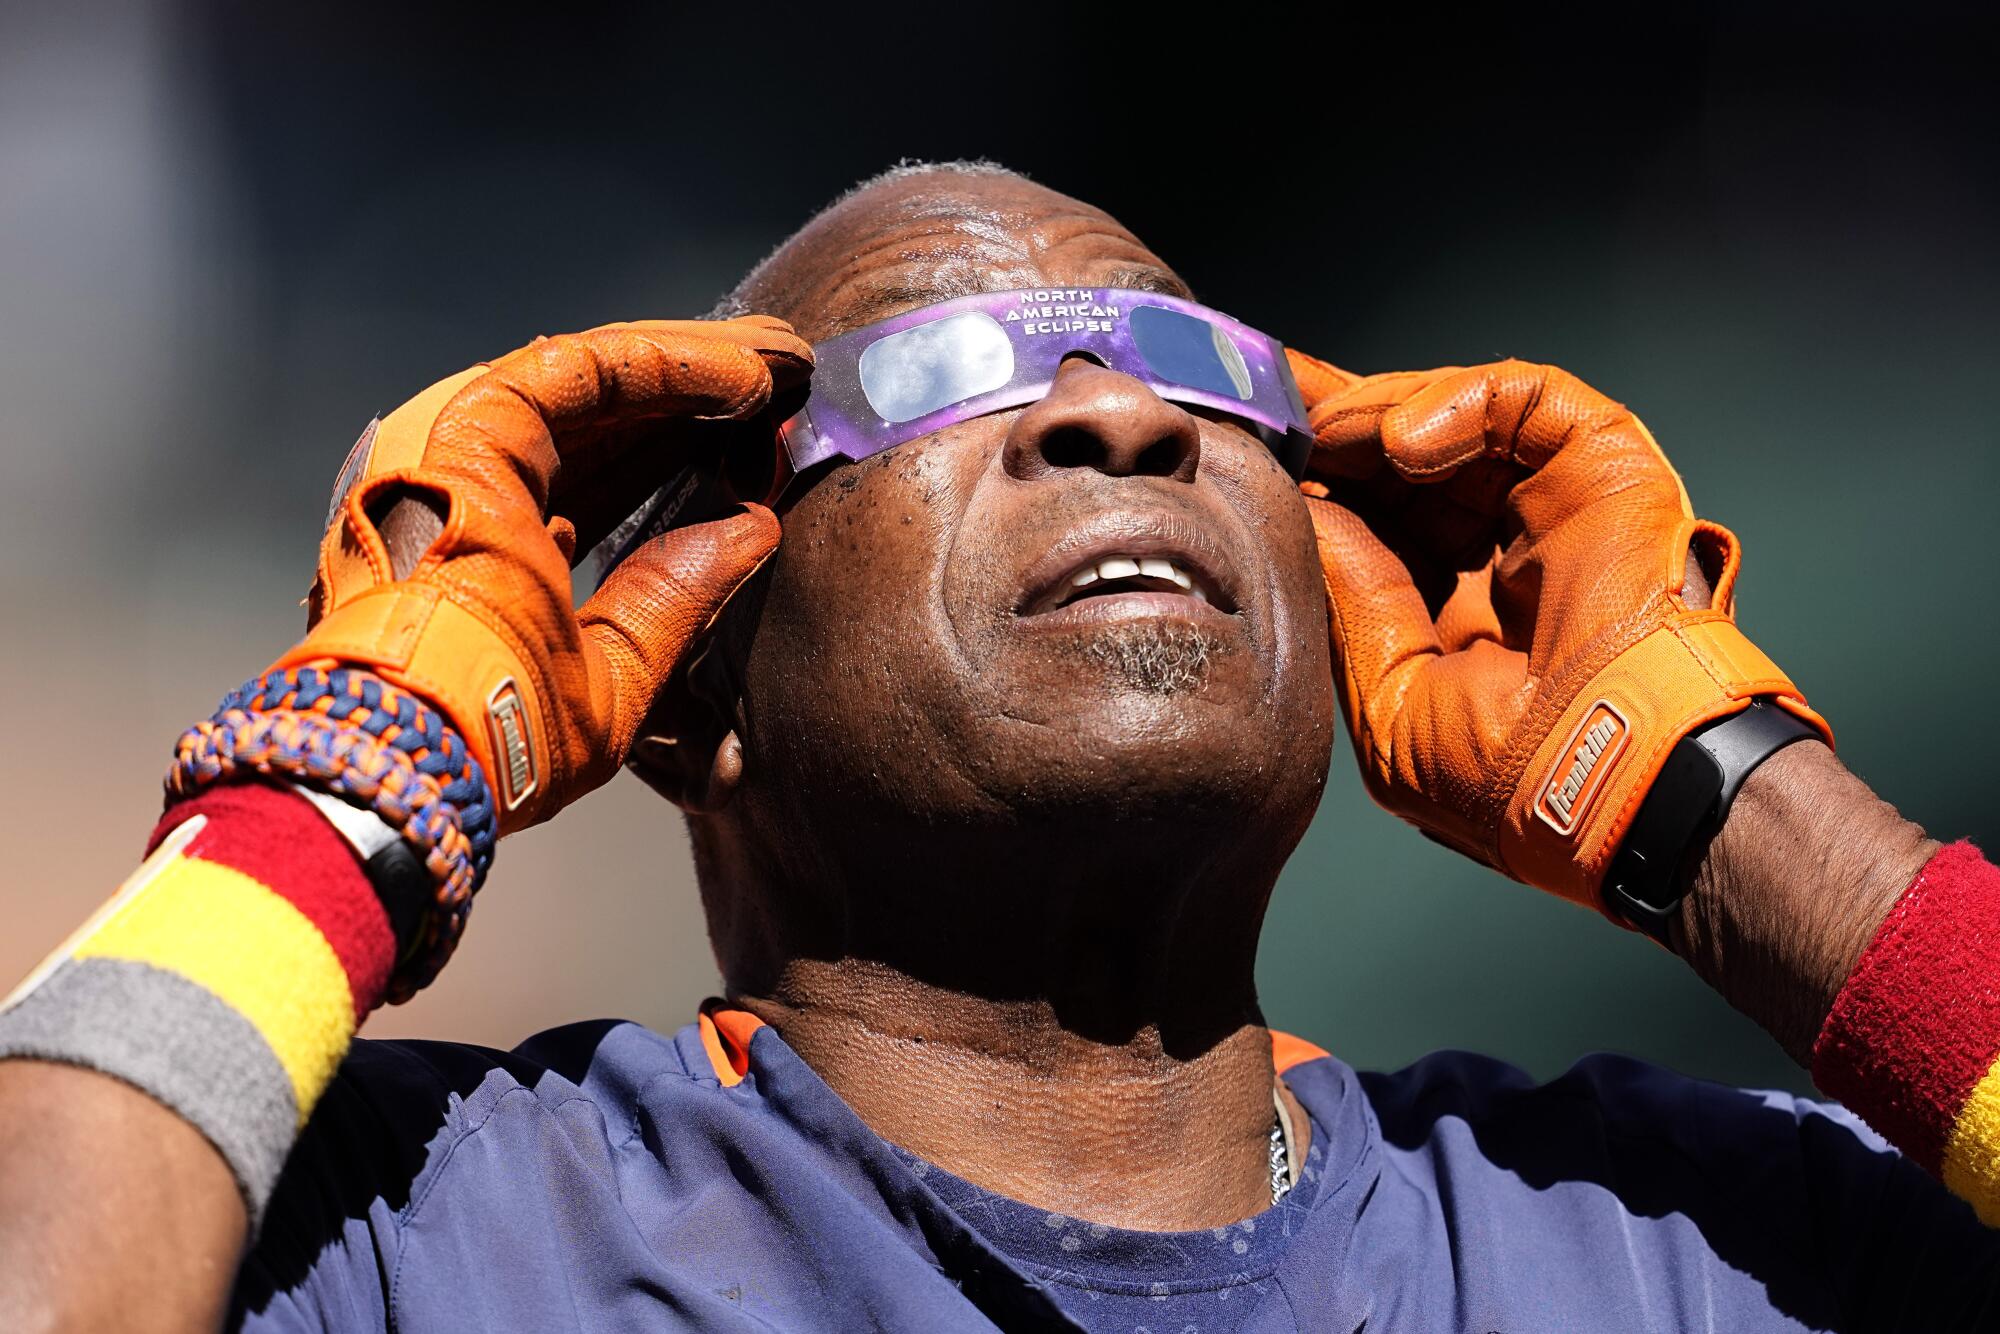 A man uses eclipse glasses while looking up at the sky